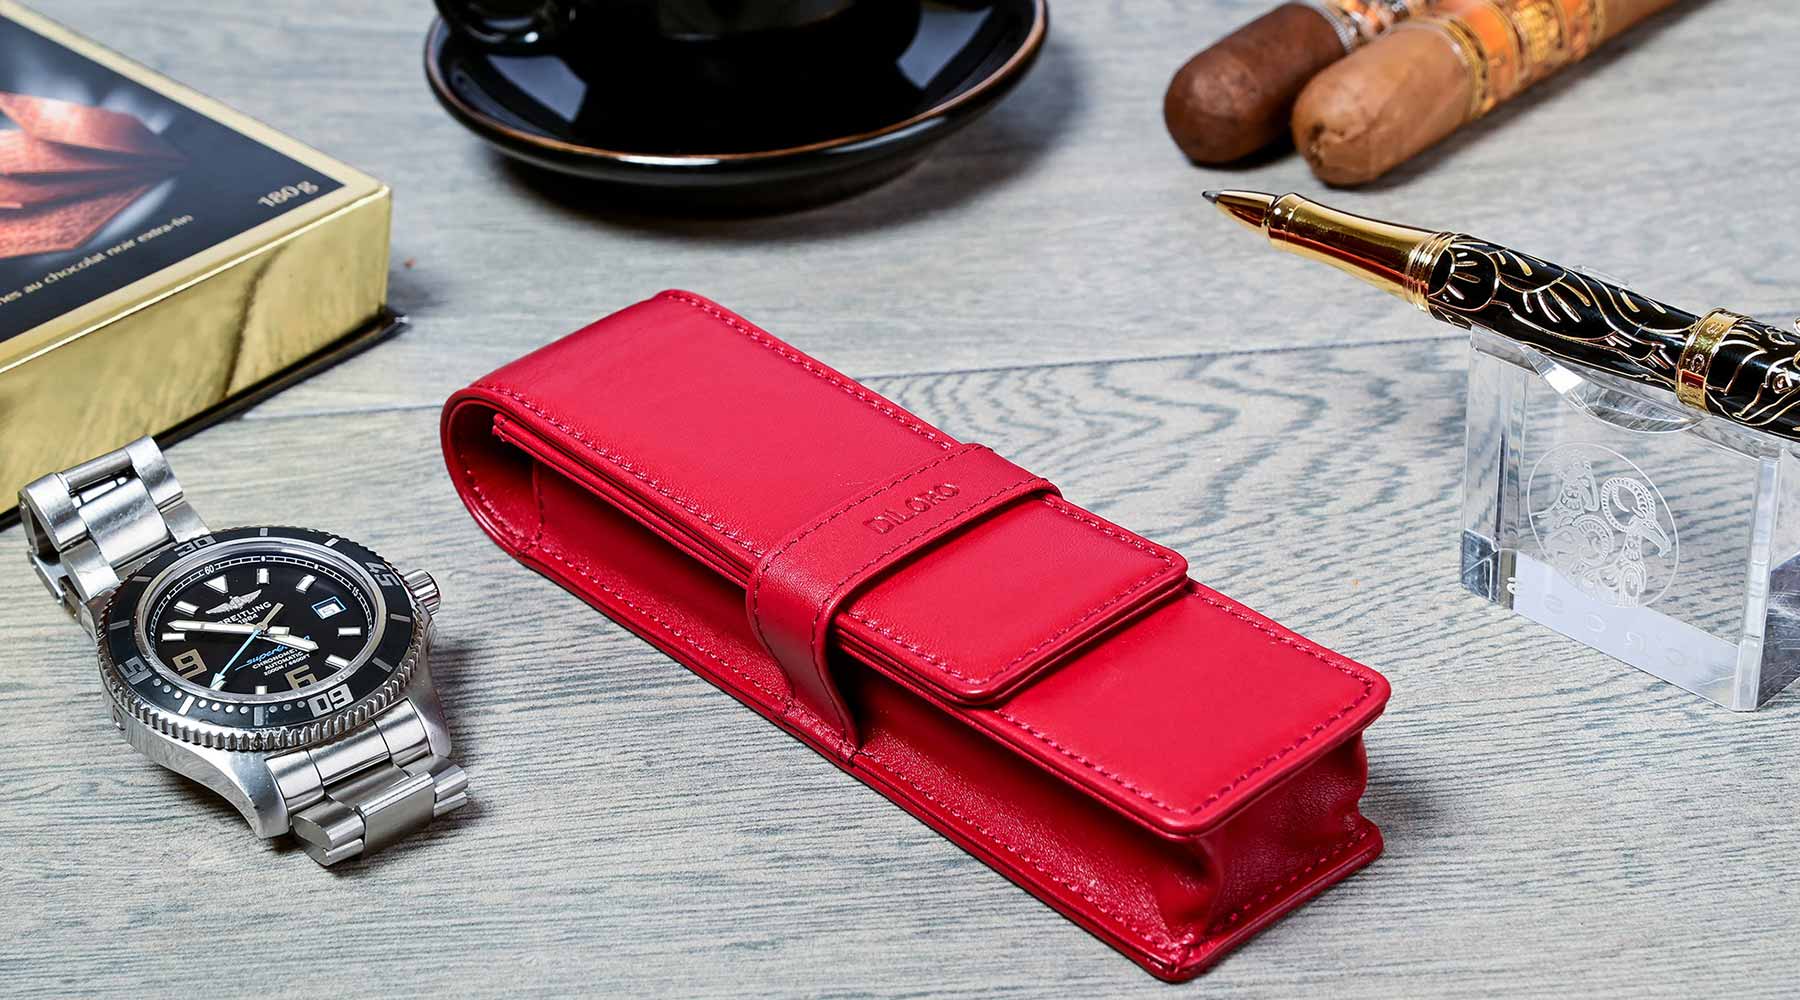 DiLoro Leather Pen Case Holders - Single, Double or Triple Holders in various colors